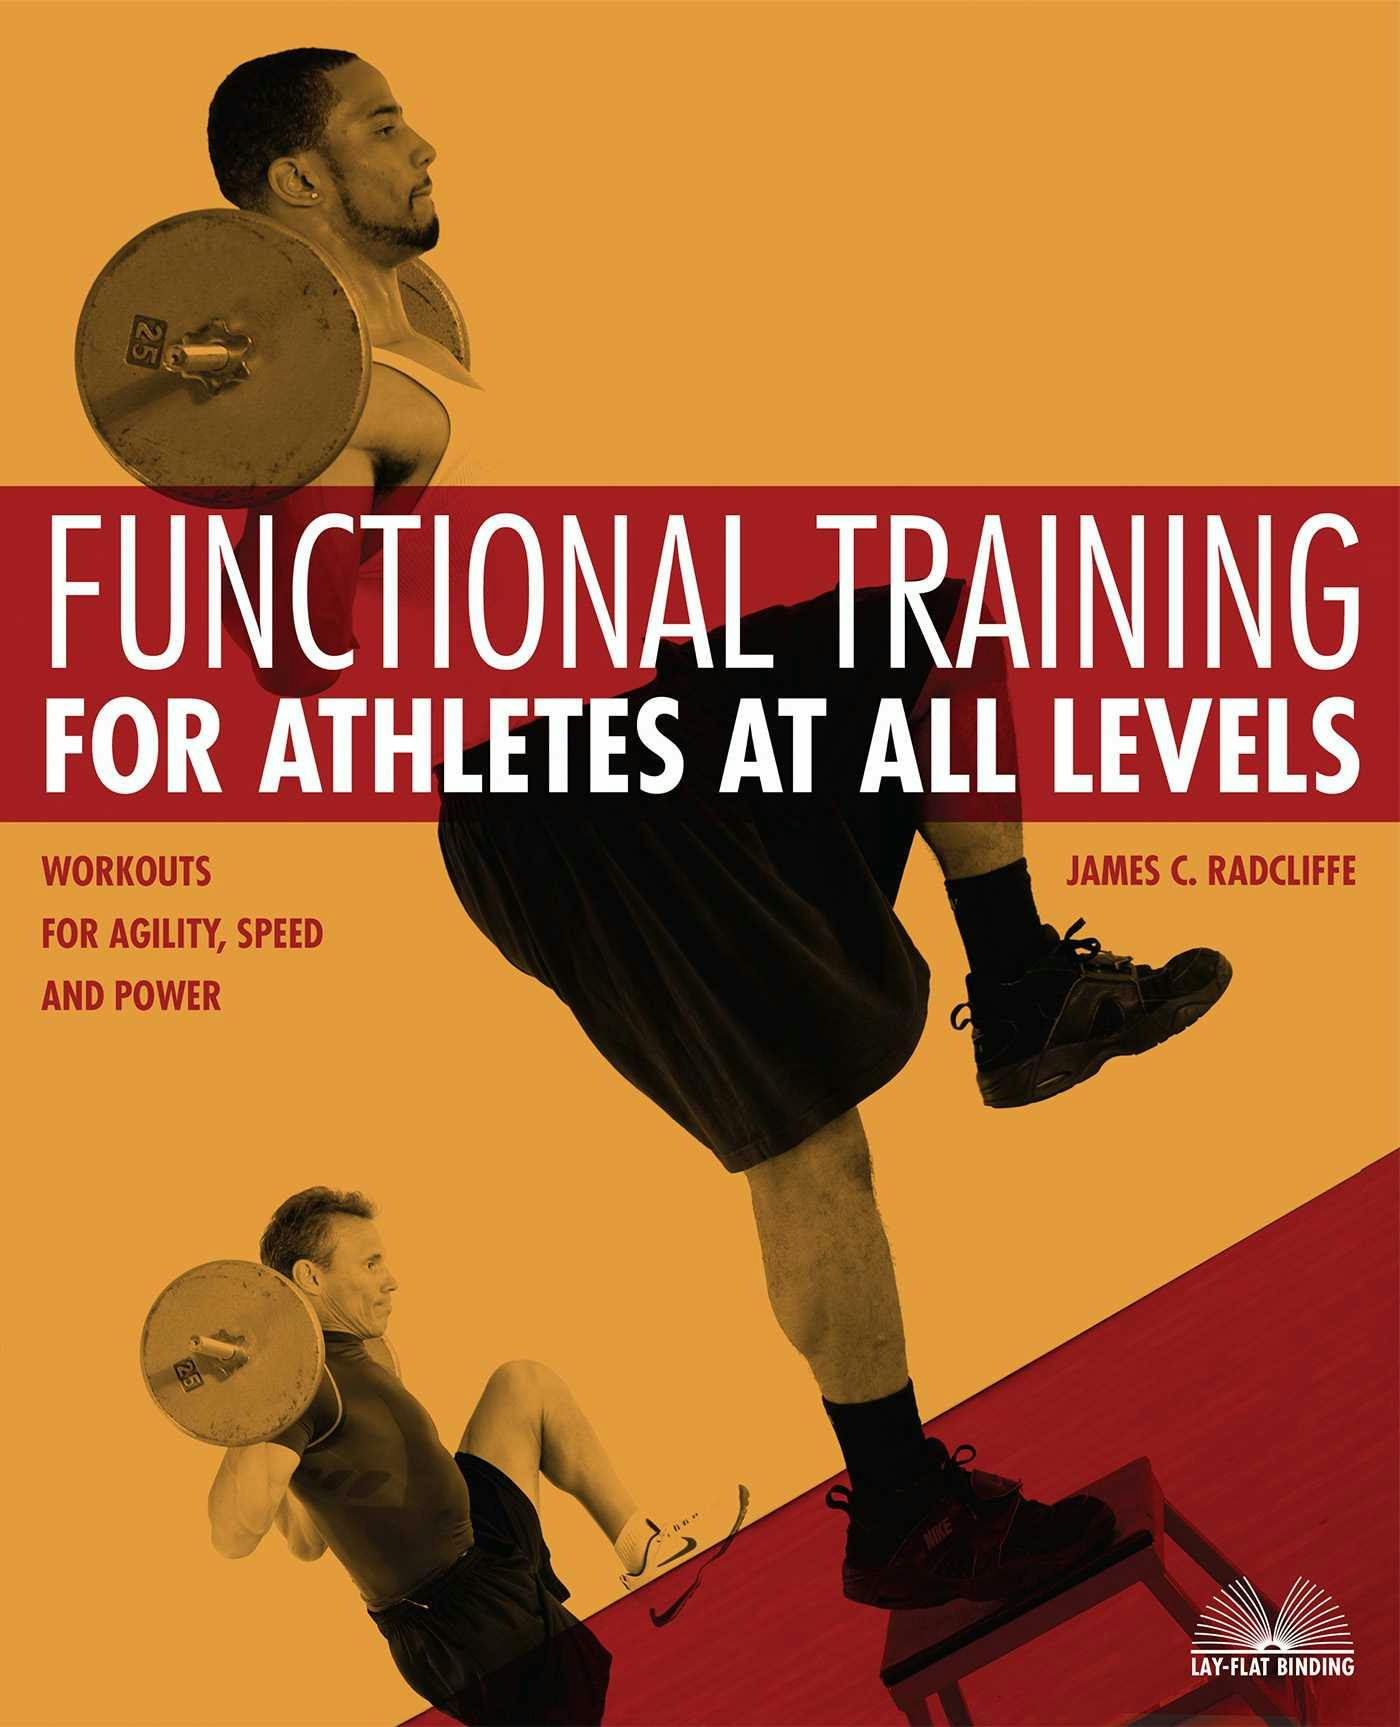 Functional Training for Athletes at All Levels: Workouts for Agility, Speed and Power - James C. Radcliffe